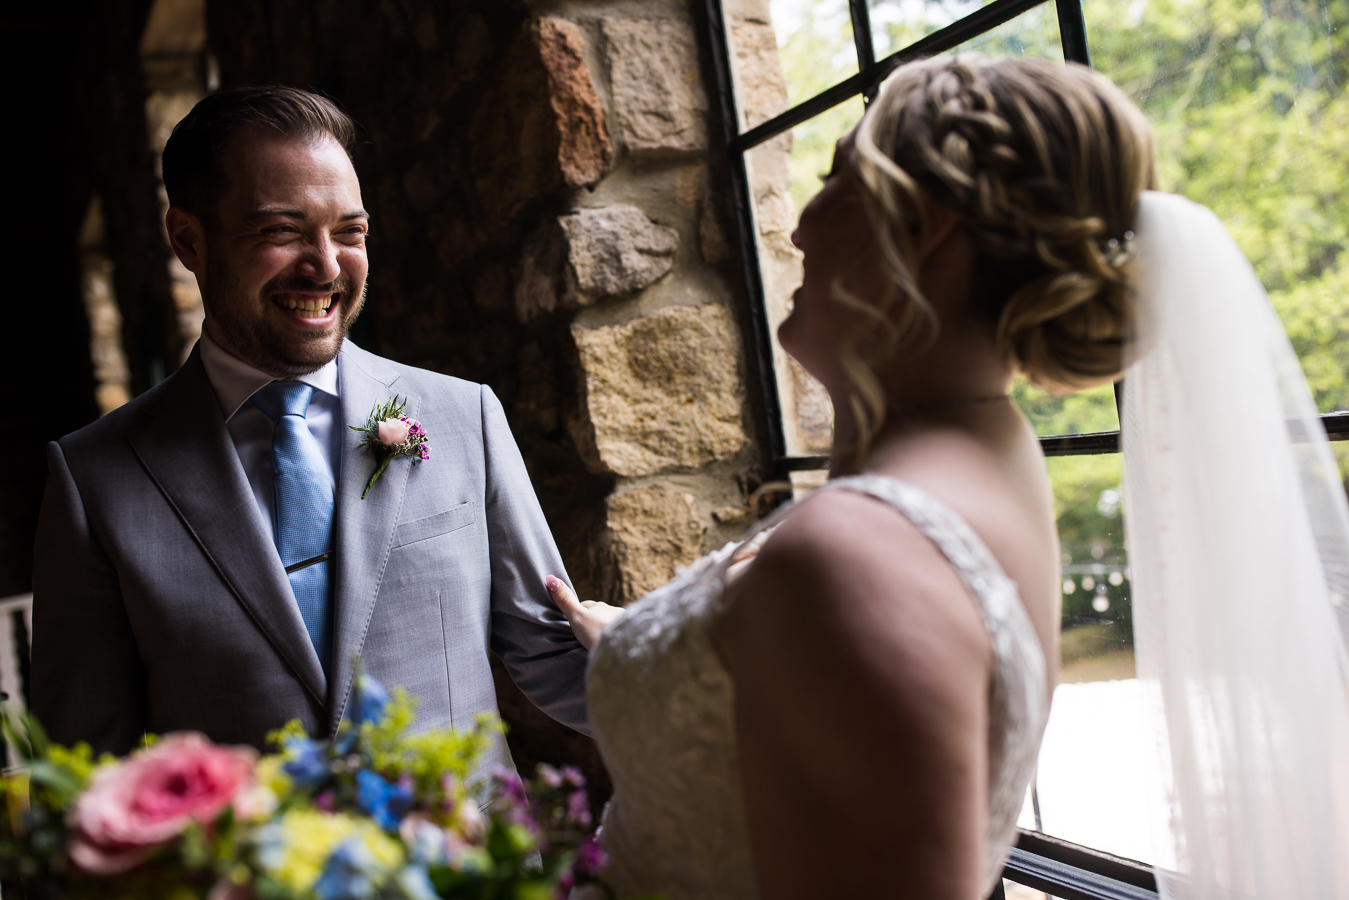 Holly Hedge Estate Wedding Photographer, lisa rhinehart, captures the bride and groom as they smile and laugh at each other during their unique indoor first look 